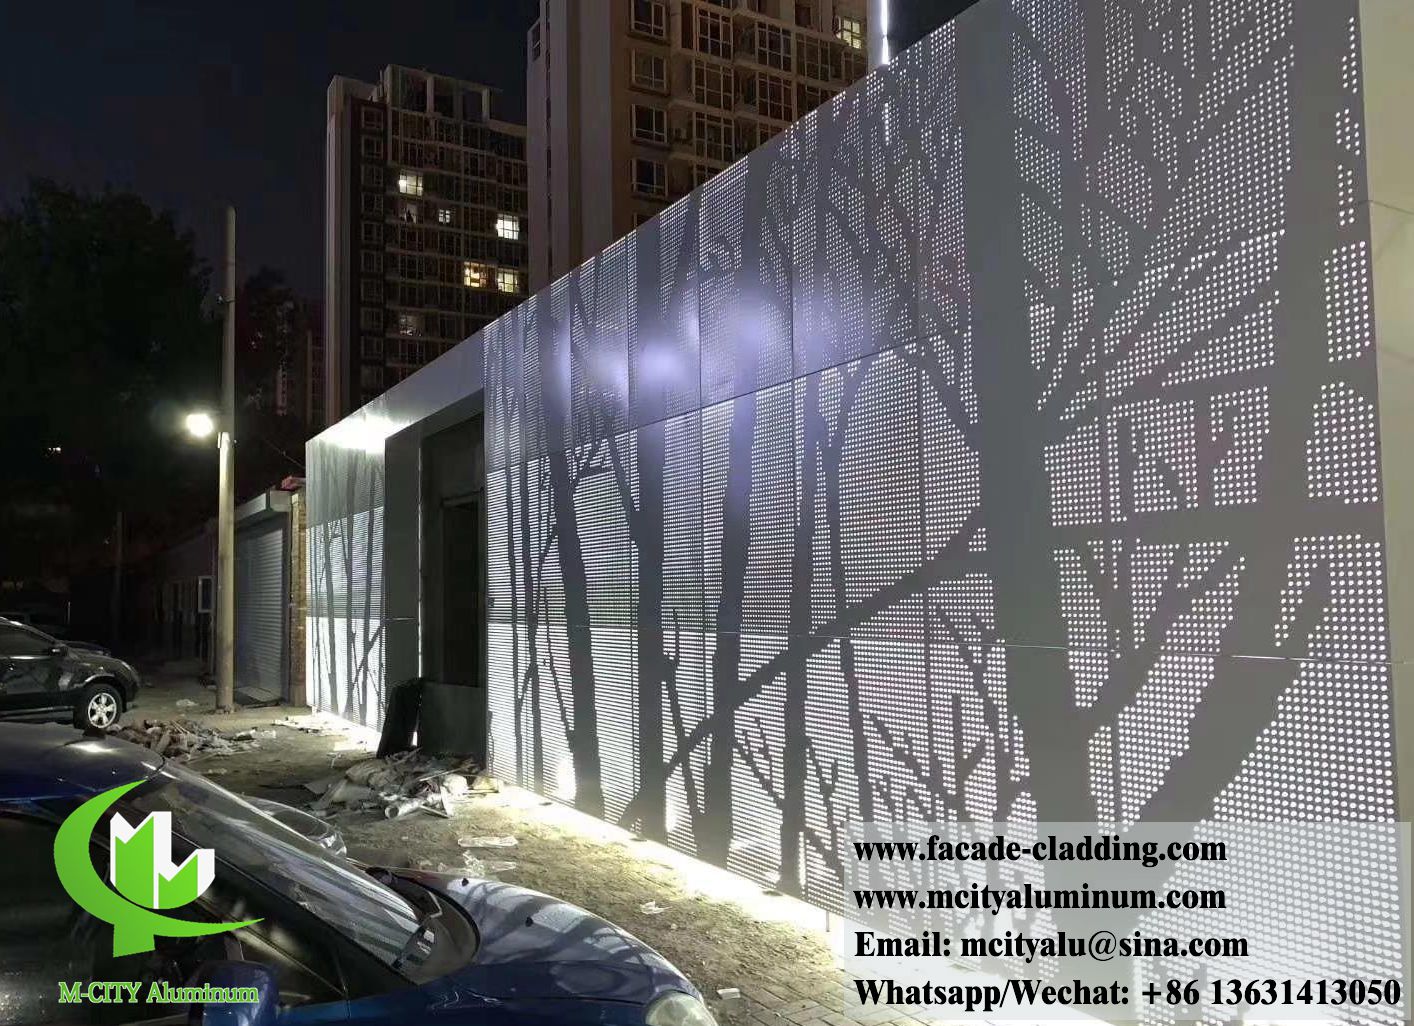 CNC Perforating tree design metal wall cladding with LED light inside